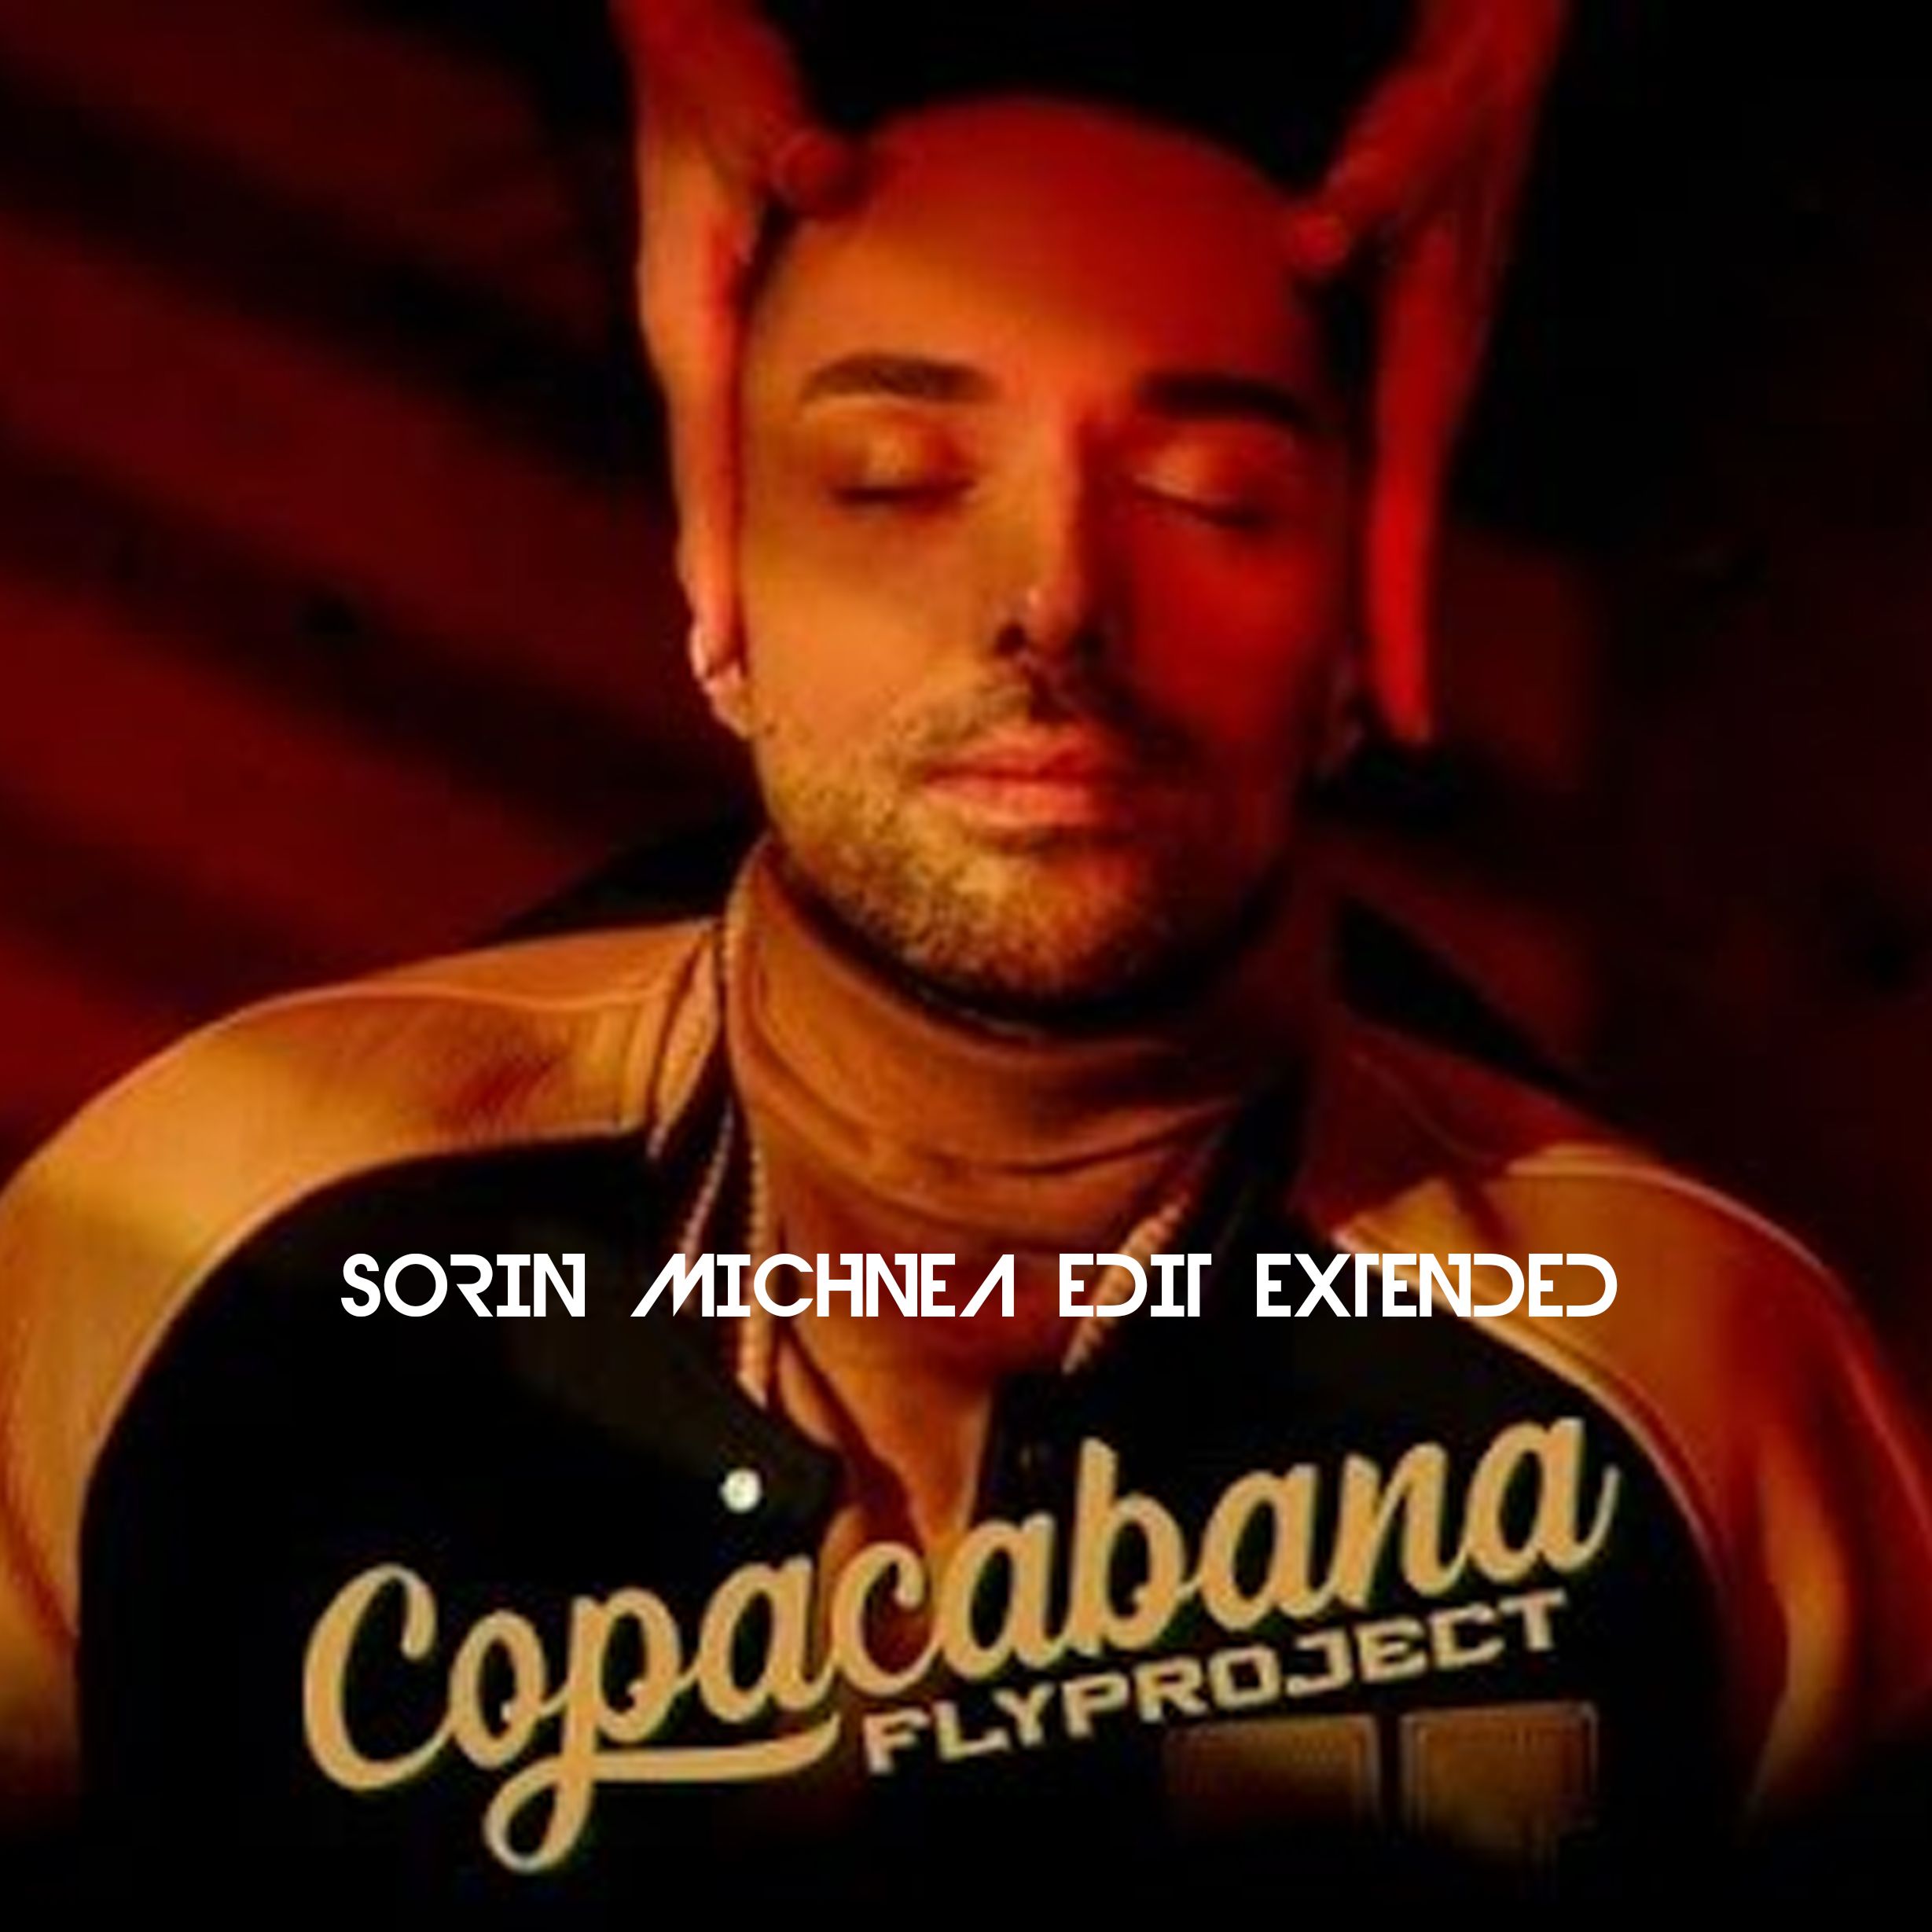 FLY PROJECT - COPACABANA ( SORIN MICHNEA EDIT EXTENDED)